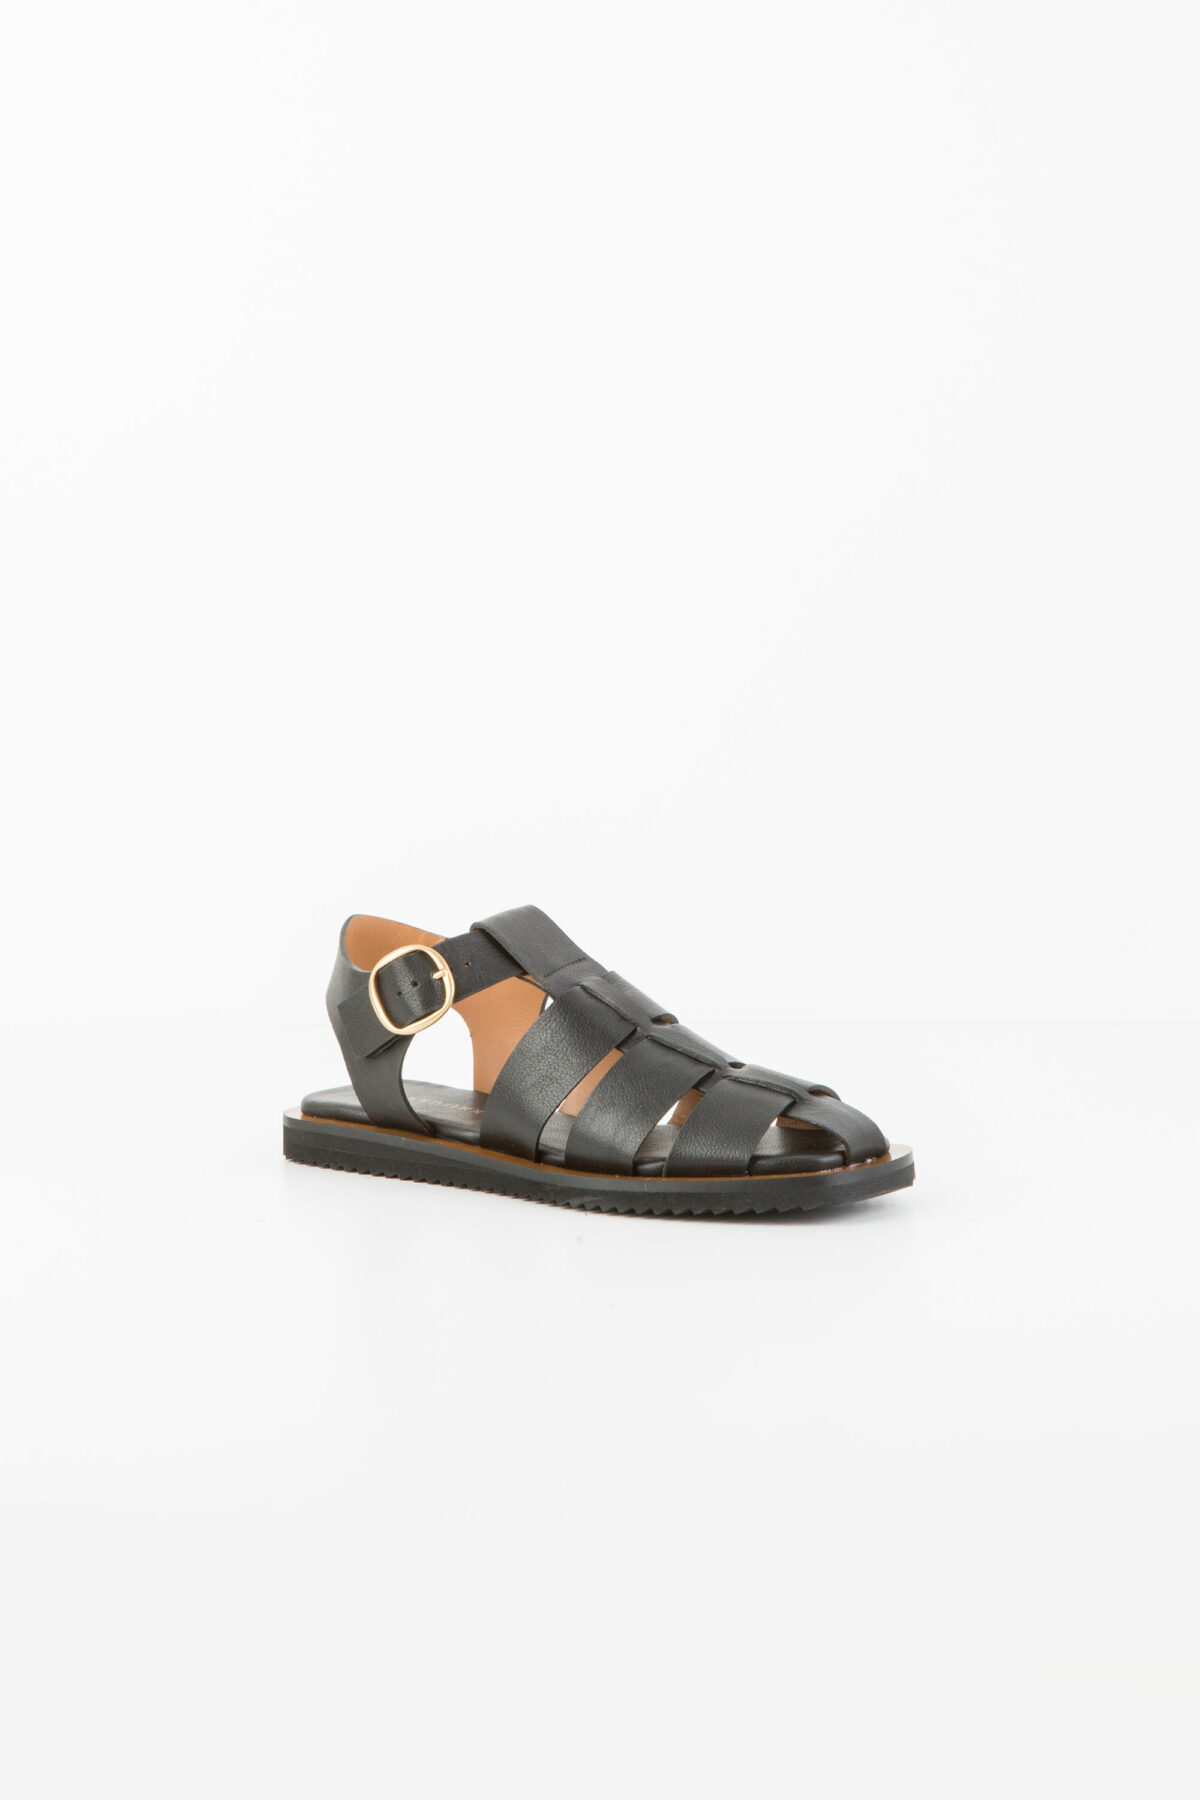 hampell-leather-black-cage-sandals-anonymous-matchboxathens